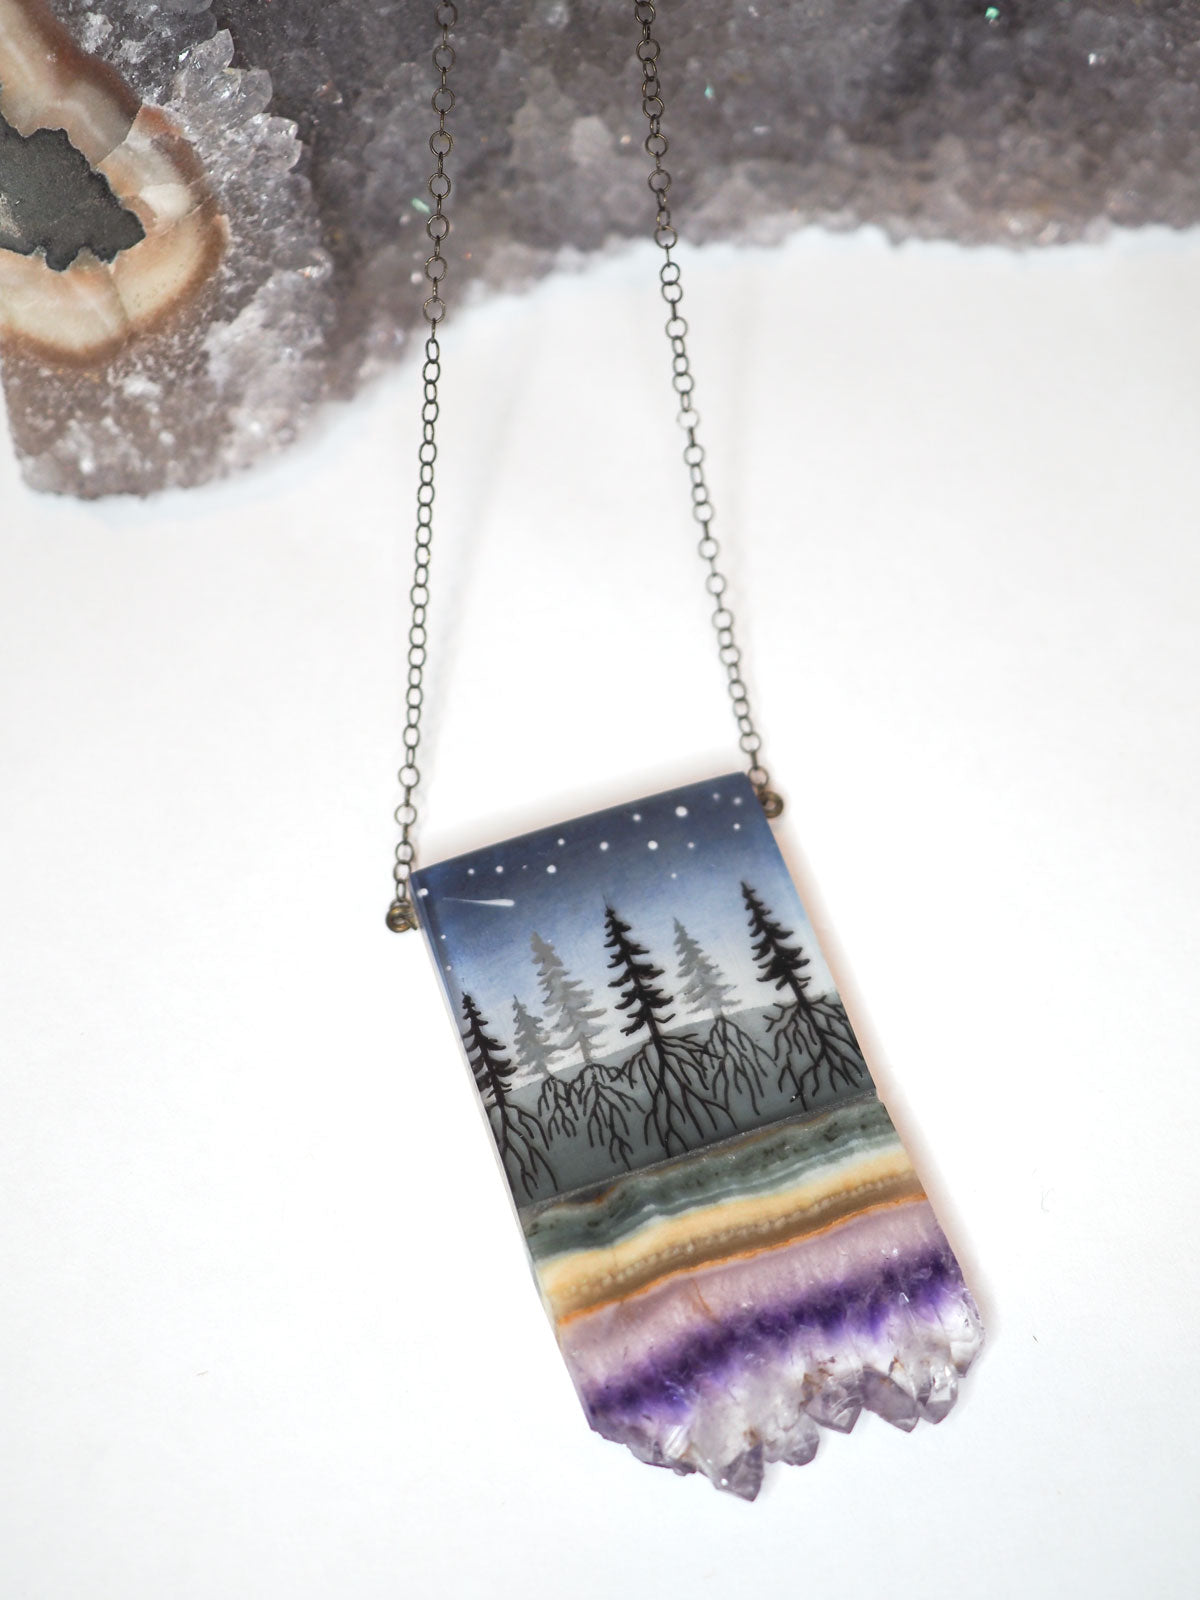 Hand-painted resin and amethyst slice rectangular necklace featuring a scene of a forest with its roots going into the ground, under a night sky with shooting stars on a silver chain